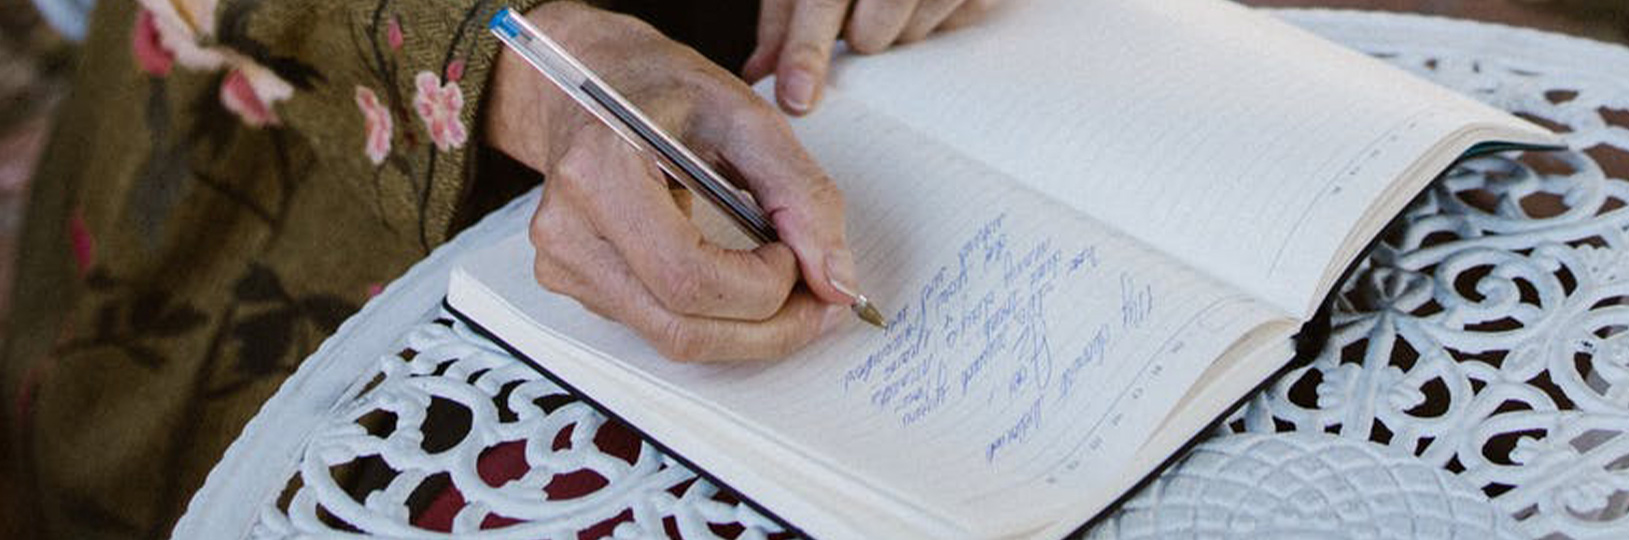 Image of a person writing their wedding vows